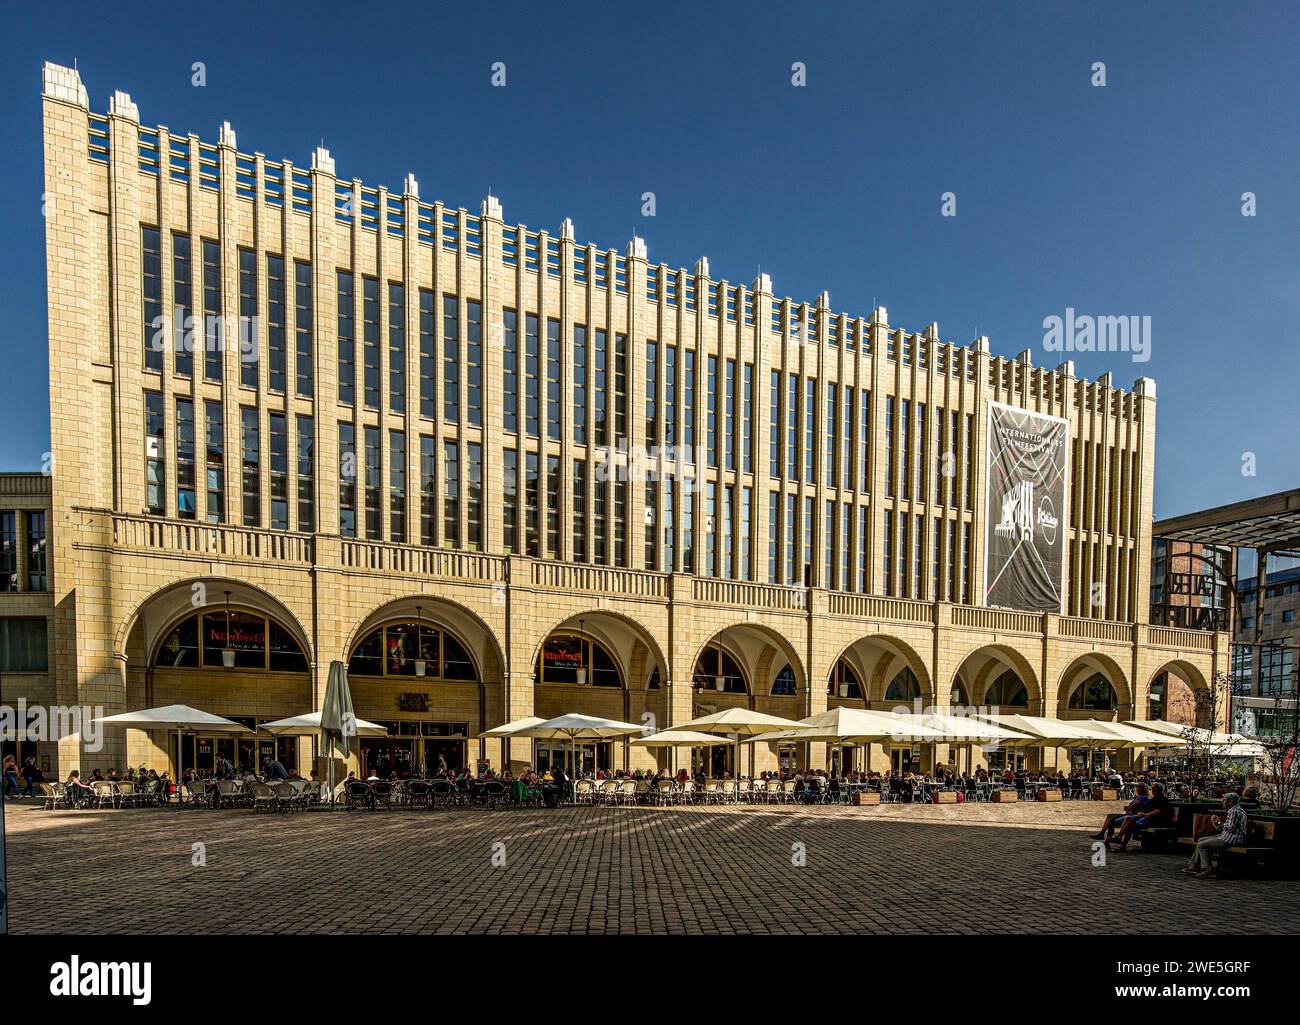 Facade of the Galerie Roter Turm shopping center by architect Hans Kollhoff (2000) with outdoor dining in the city center of Chemnitz, Saxony, Germany Stock Photo